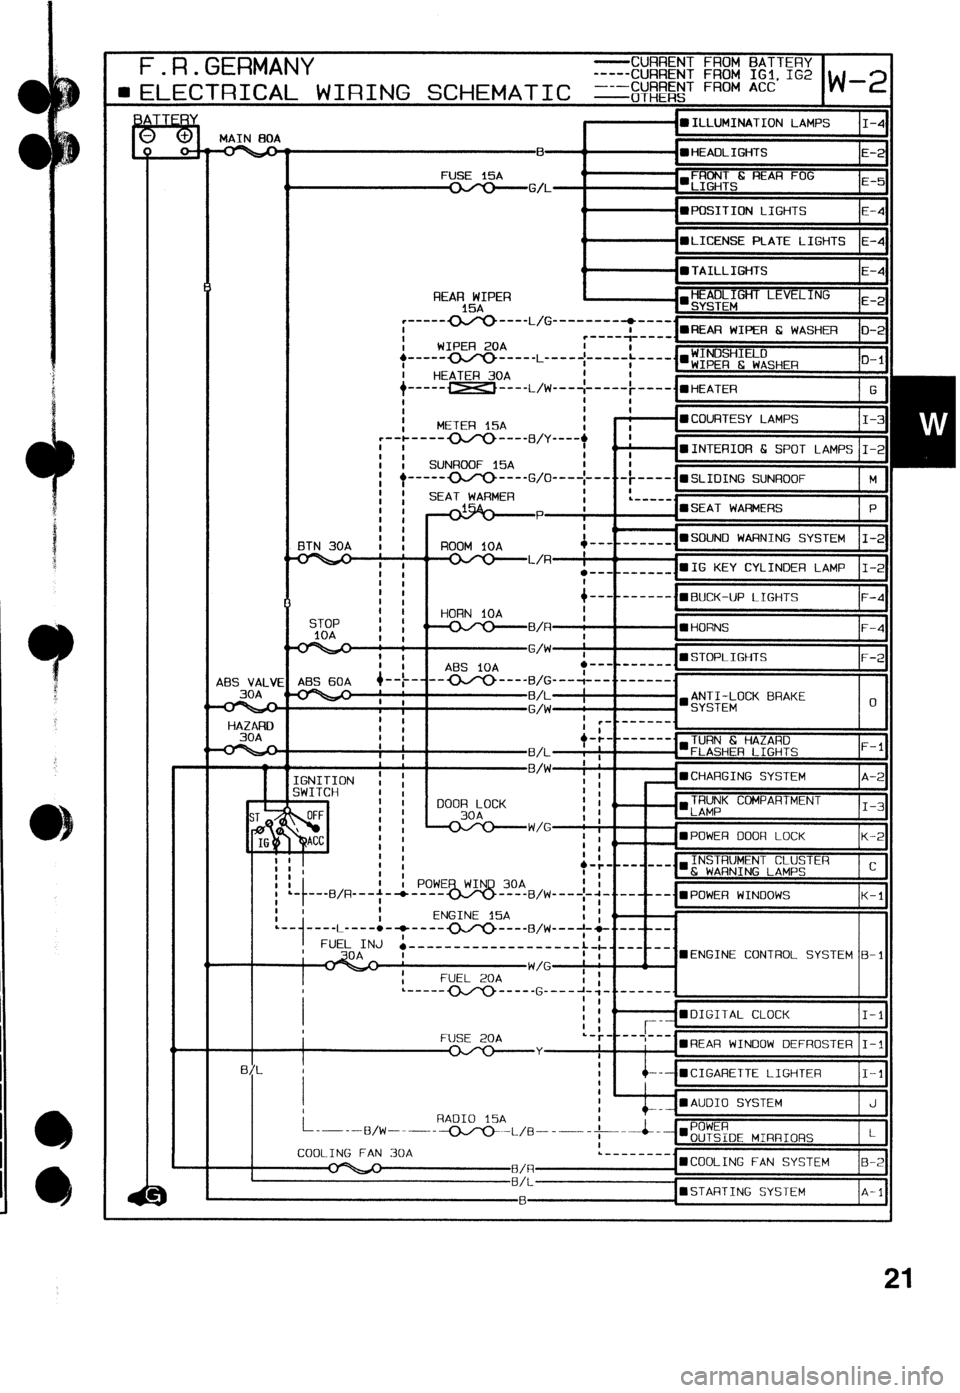 MAZDA 323 1992  Workshop Manual Suplement ,c - 
- 
3 
F.R.GERMANY  F.R.GERMANY -CURRENT FROM BATTERY  -CURRENT FROM BATTERY 
-----CURRENT FROM IGl. 1G2  -----CURRENT FROM IGl. 1G2 
l 
ELECTRICAL WIRING SCHEMATIC =&$&jT FRoM ACC l ELECTRICAL W